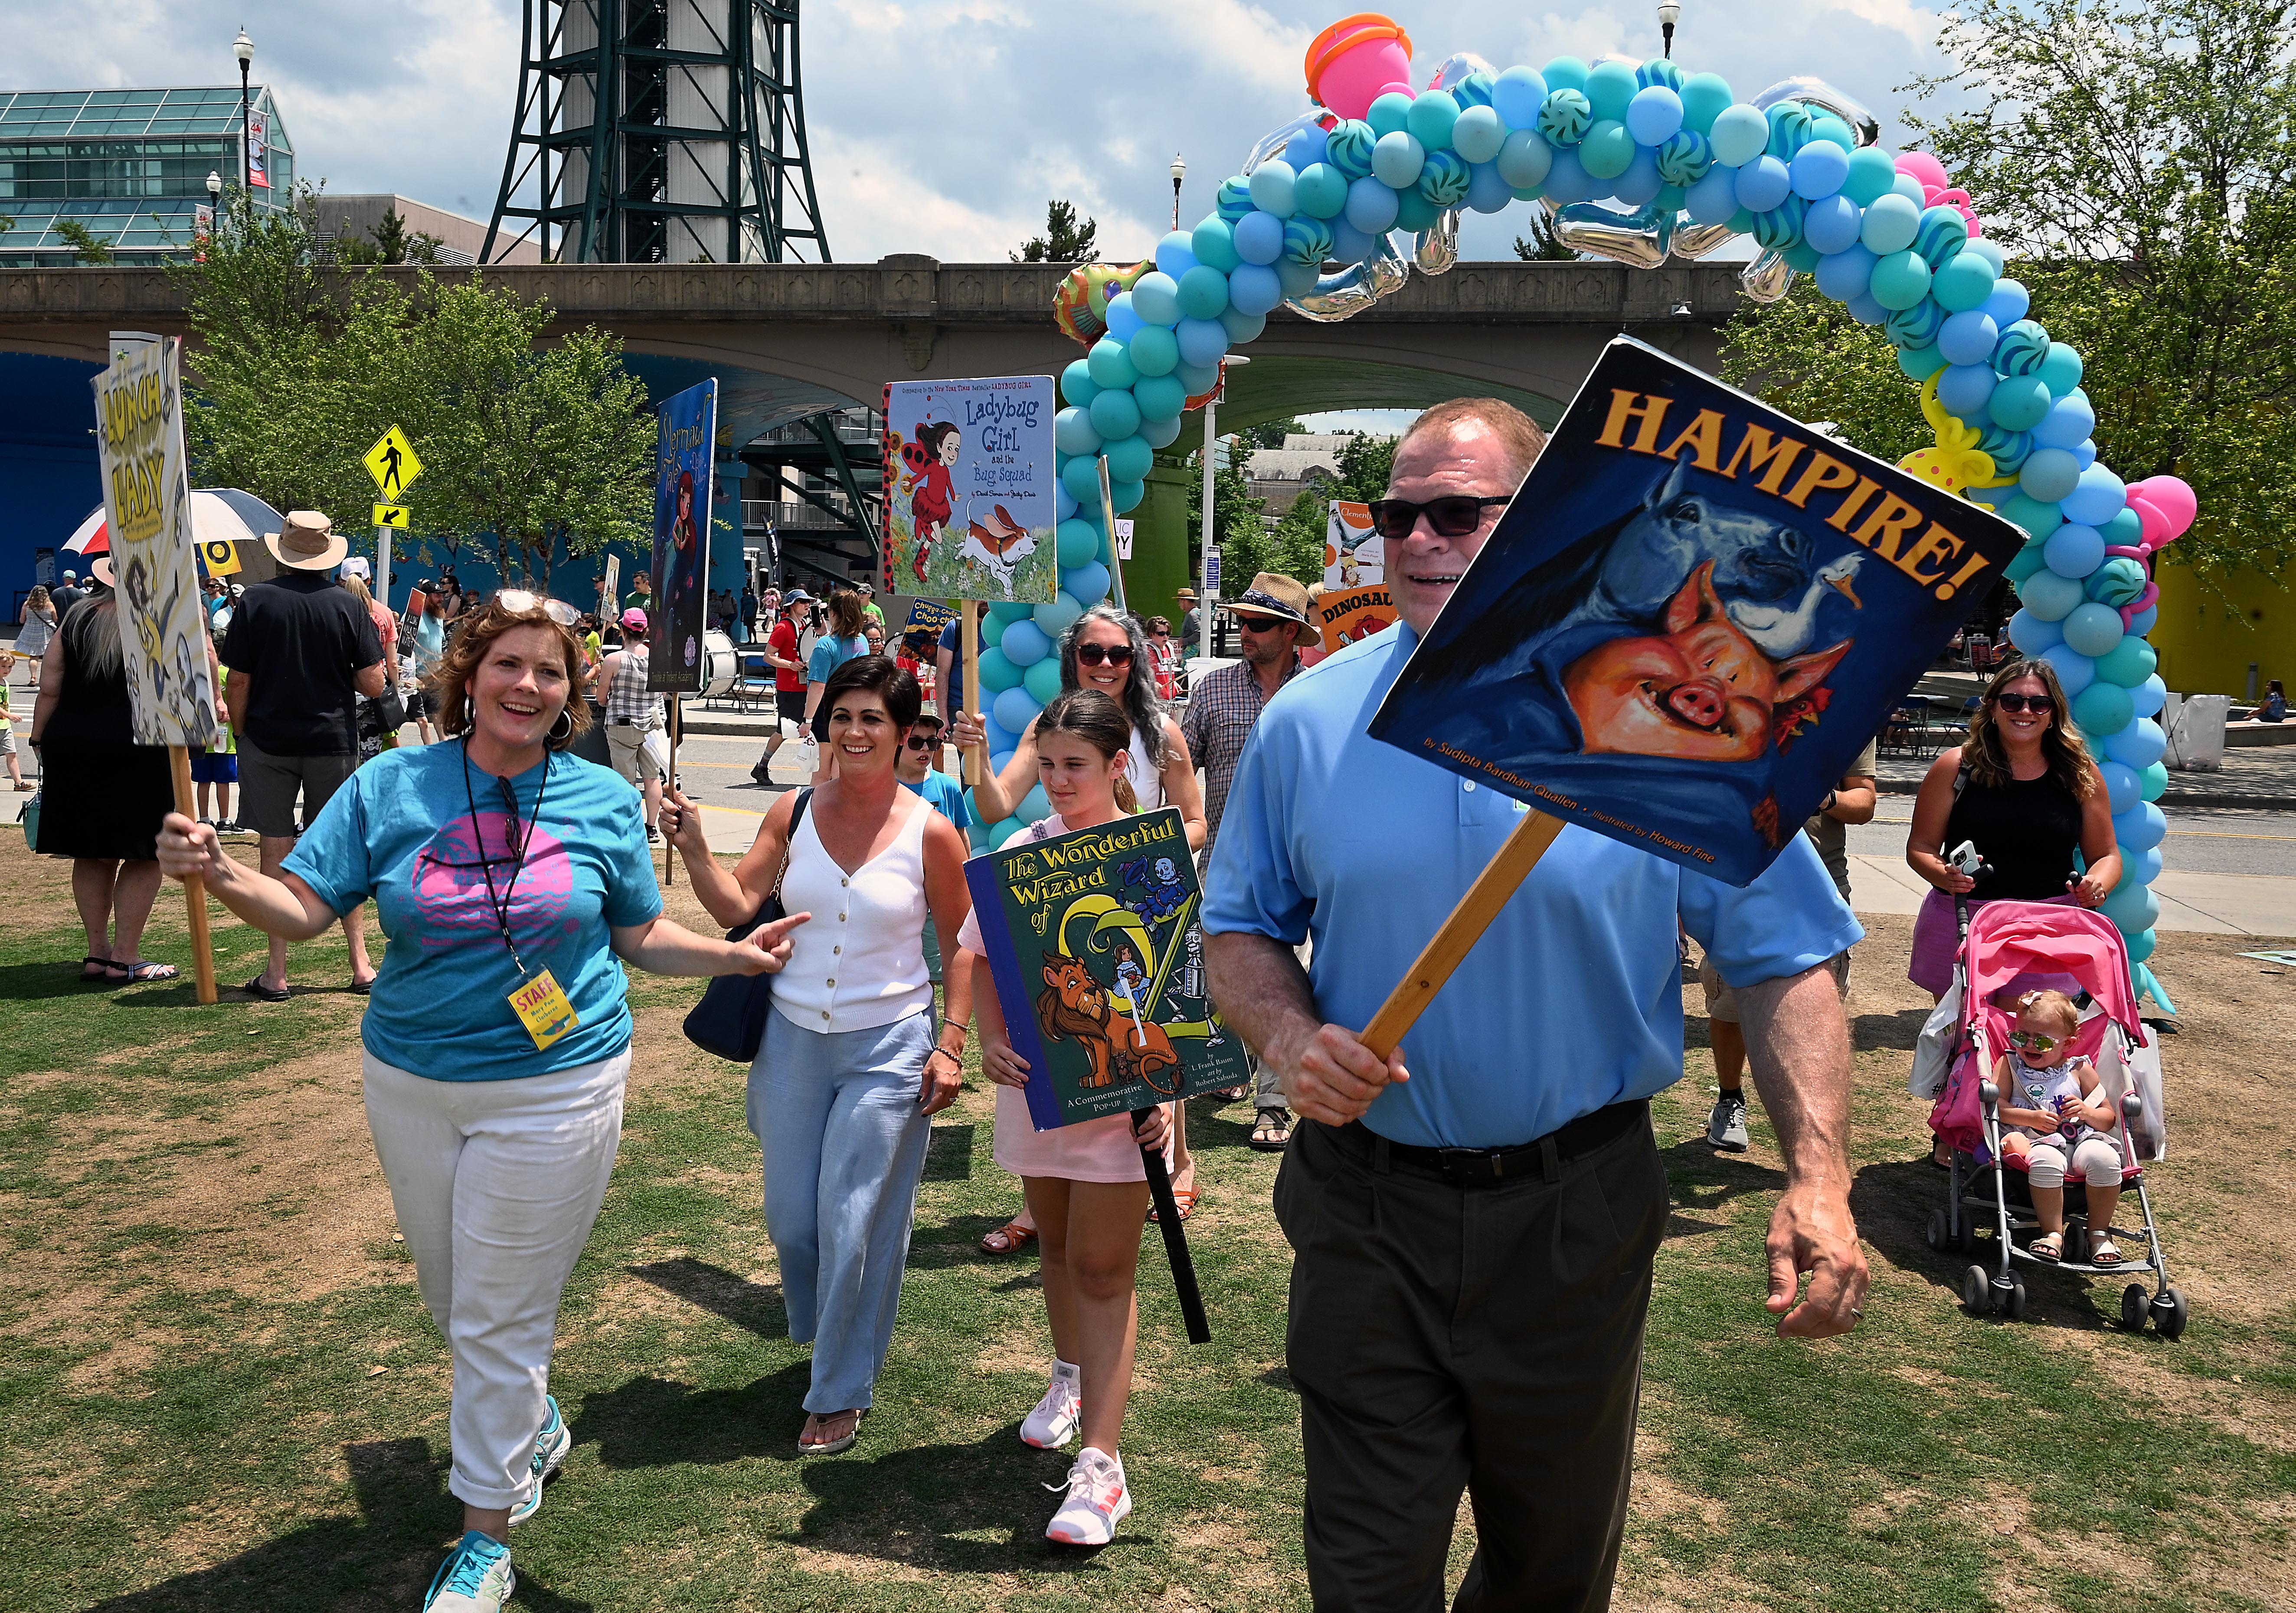 People walking in a parade with large book signs